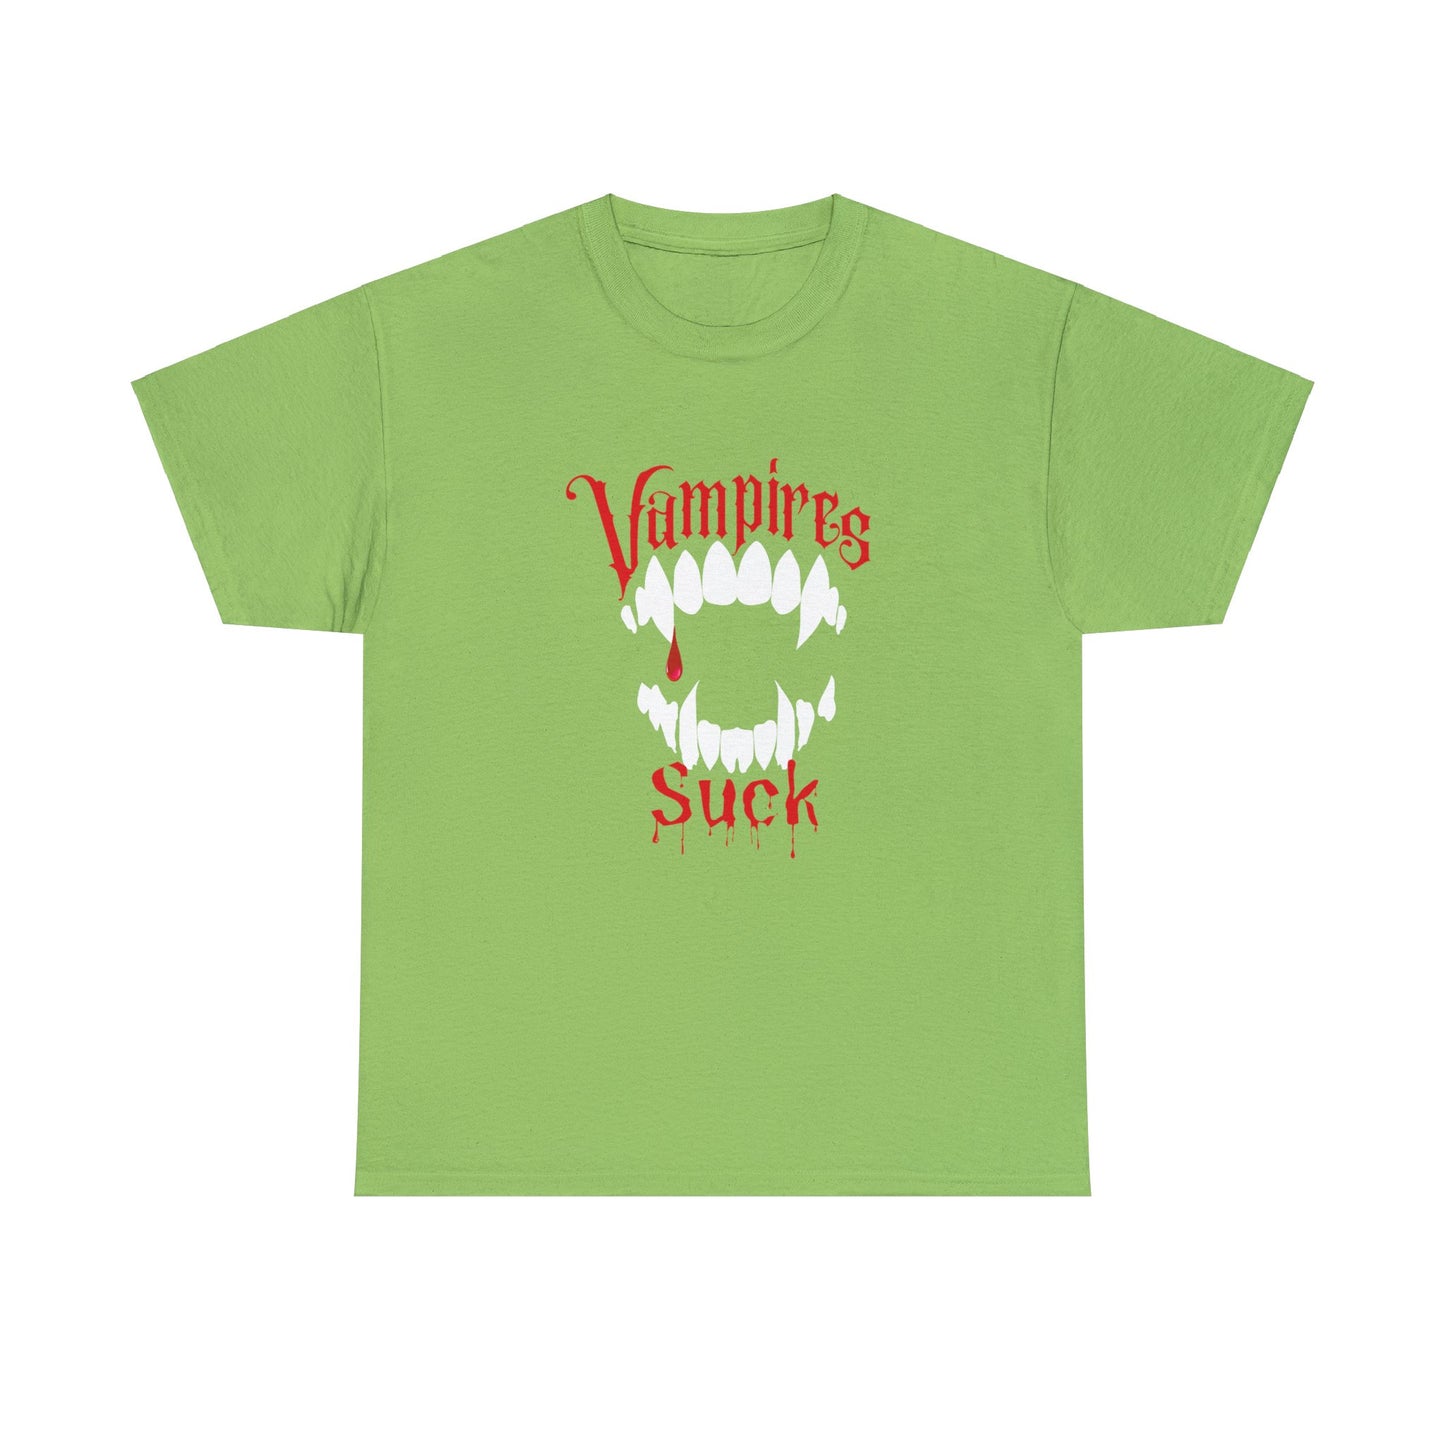 Vampires Suck T-Shirt, Funny Ironic Halloween Black Tee, Macabre, Ironic Spooky, White Vampire Fangs, Creepy Red Text, Dripping Blood